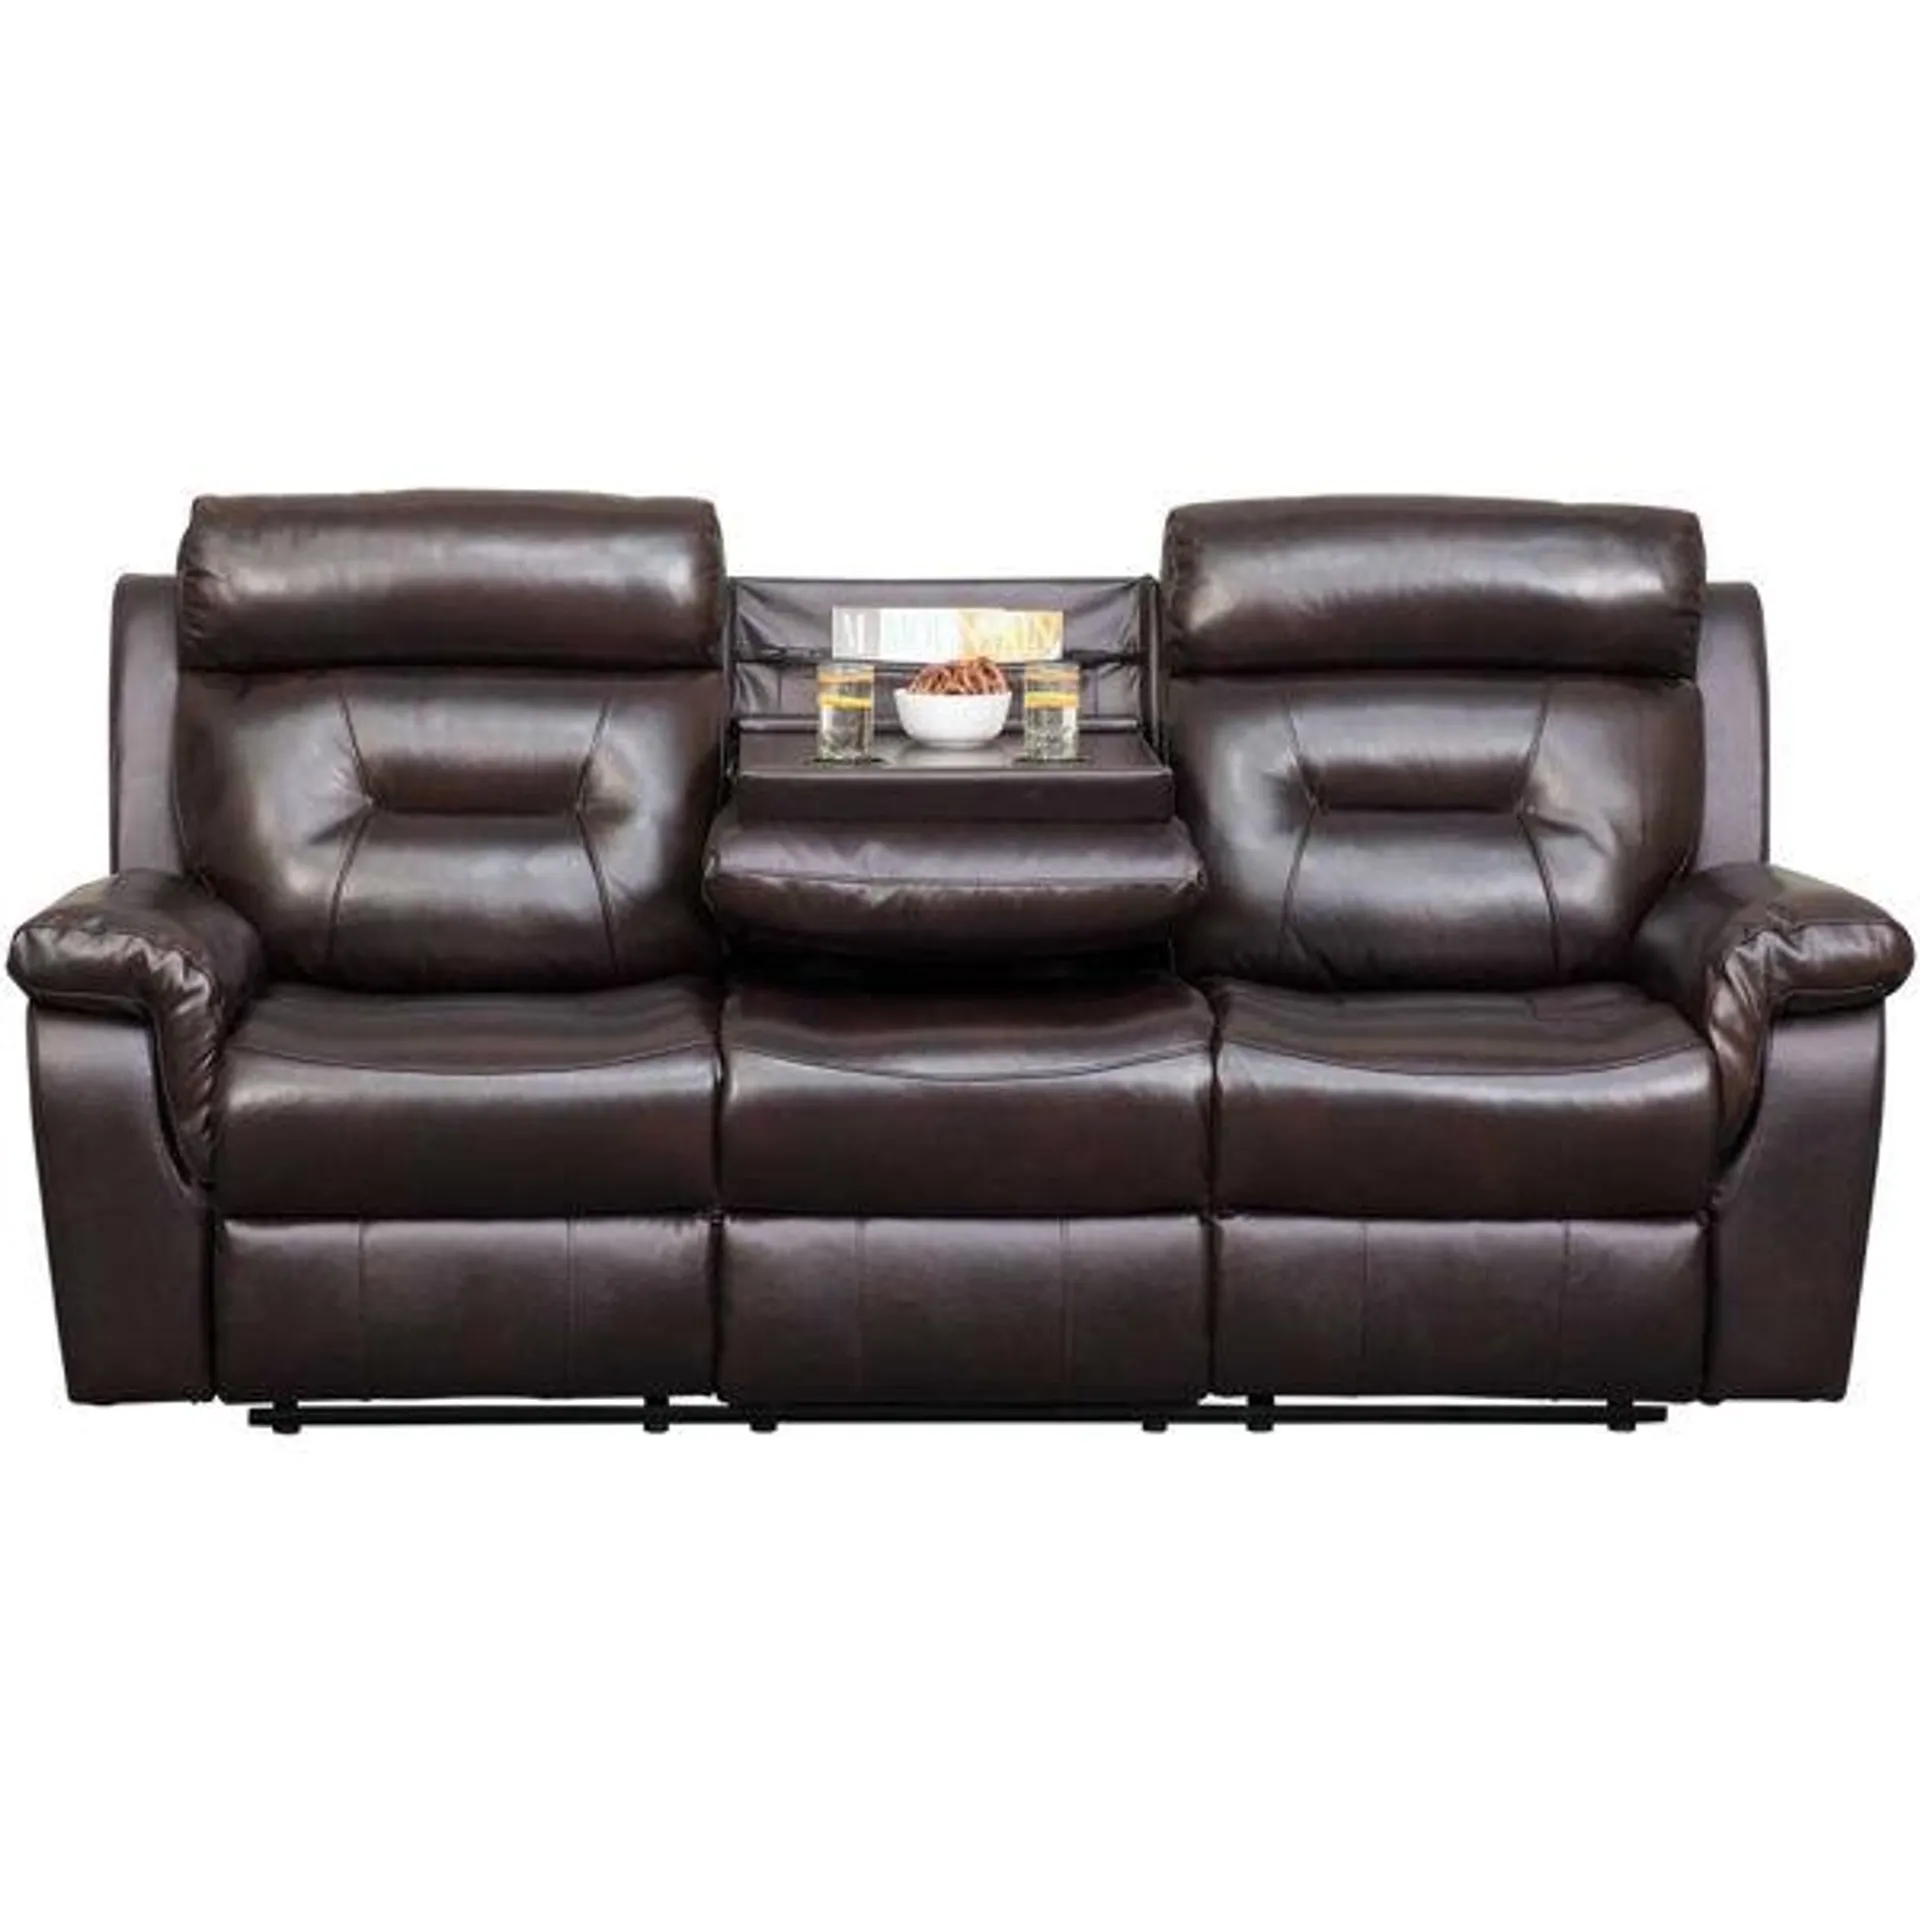 Watson Brown Leather Reclining Sofa with Drop Down Table